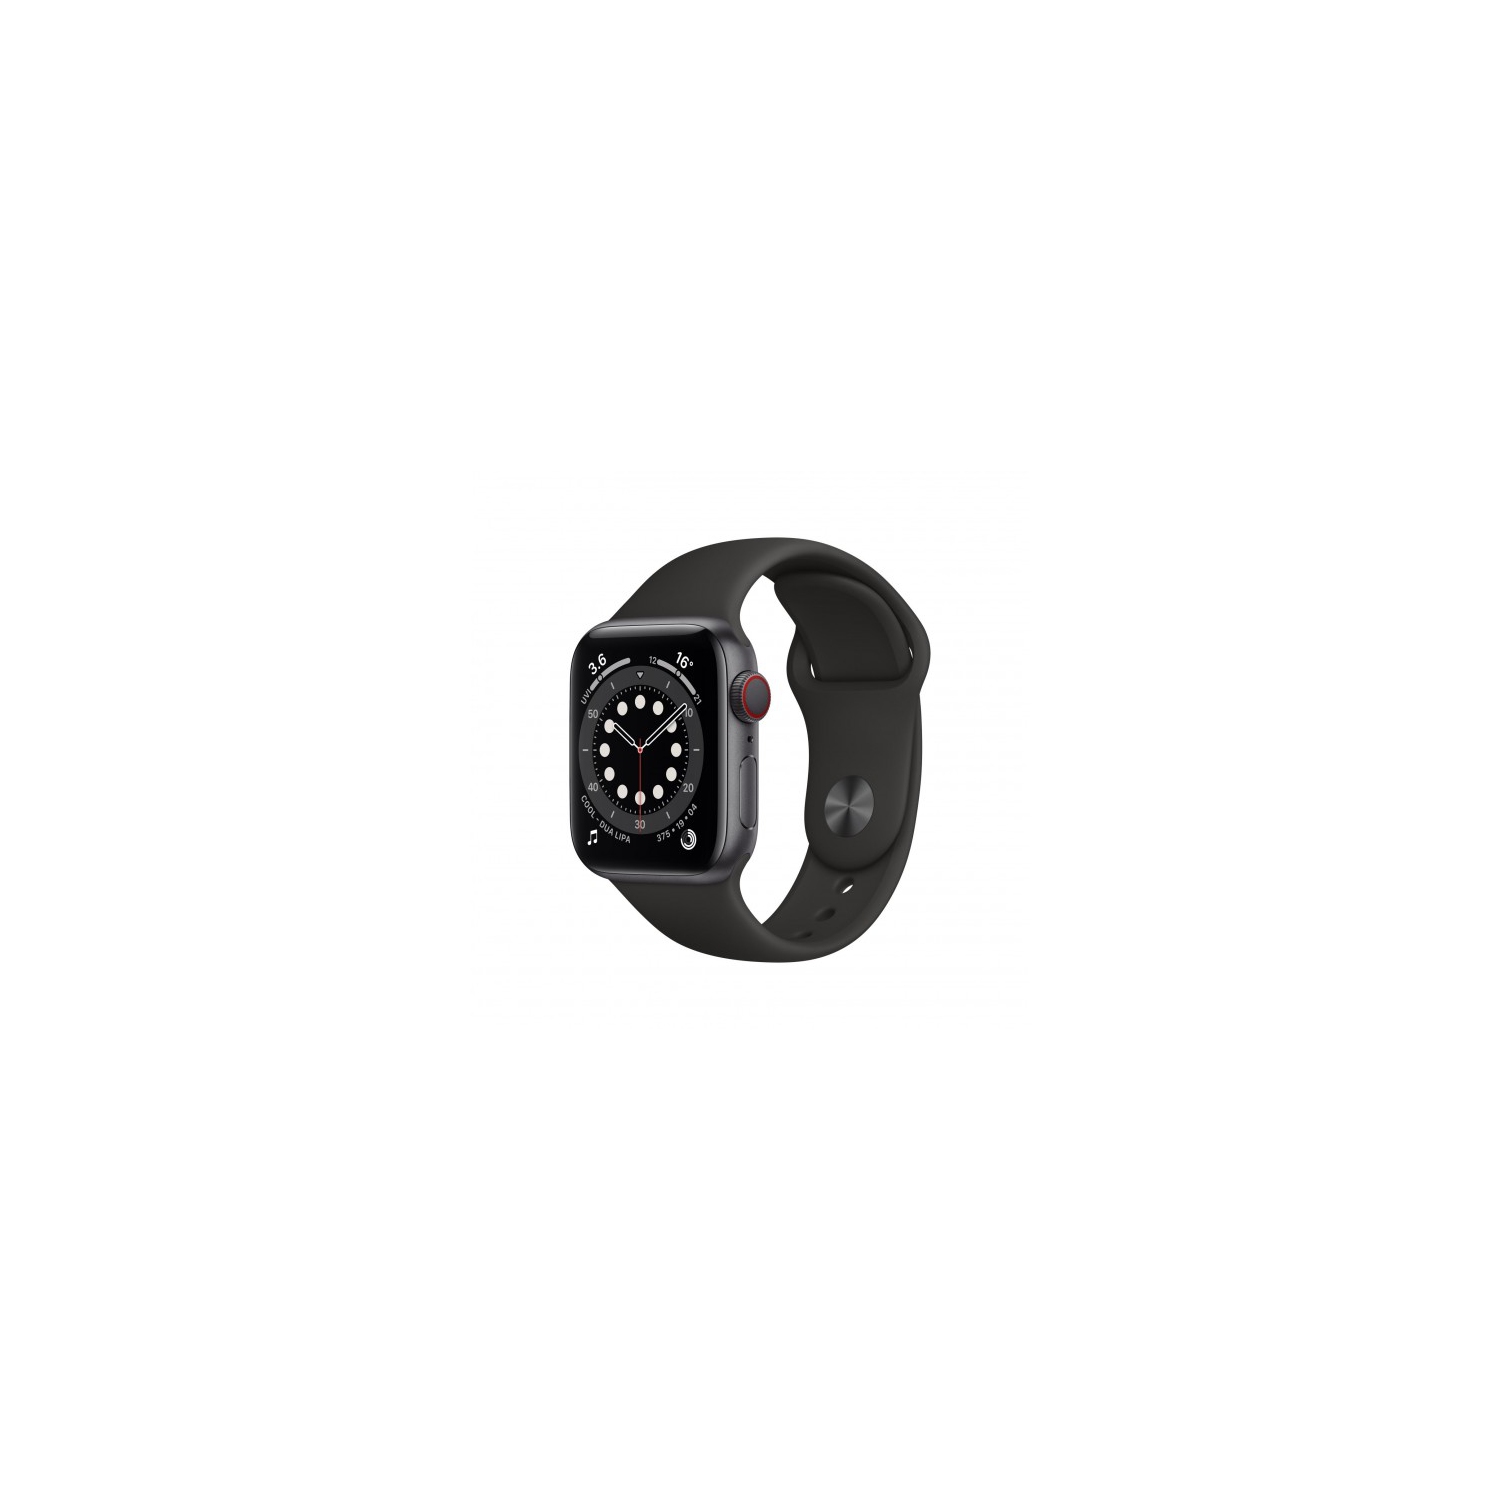 Apple Watch Series 6 (GPS + Cellular) 40mm Space Gray Aluminum 